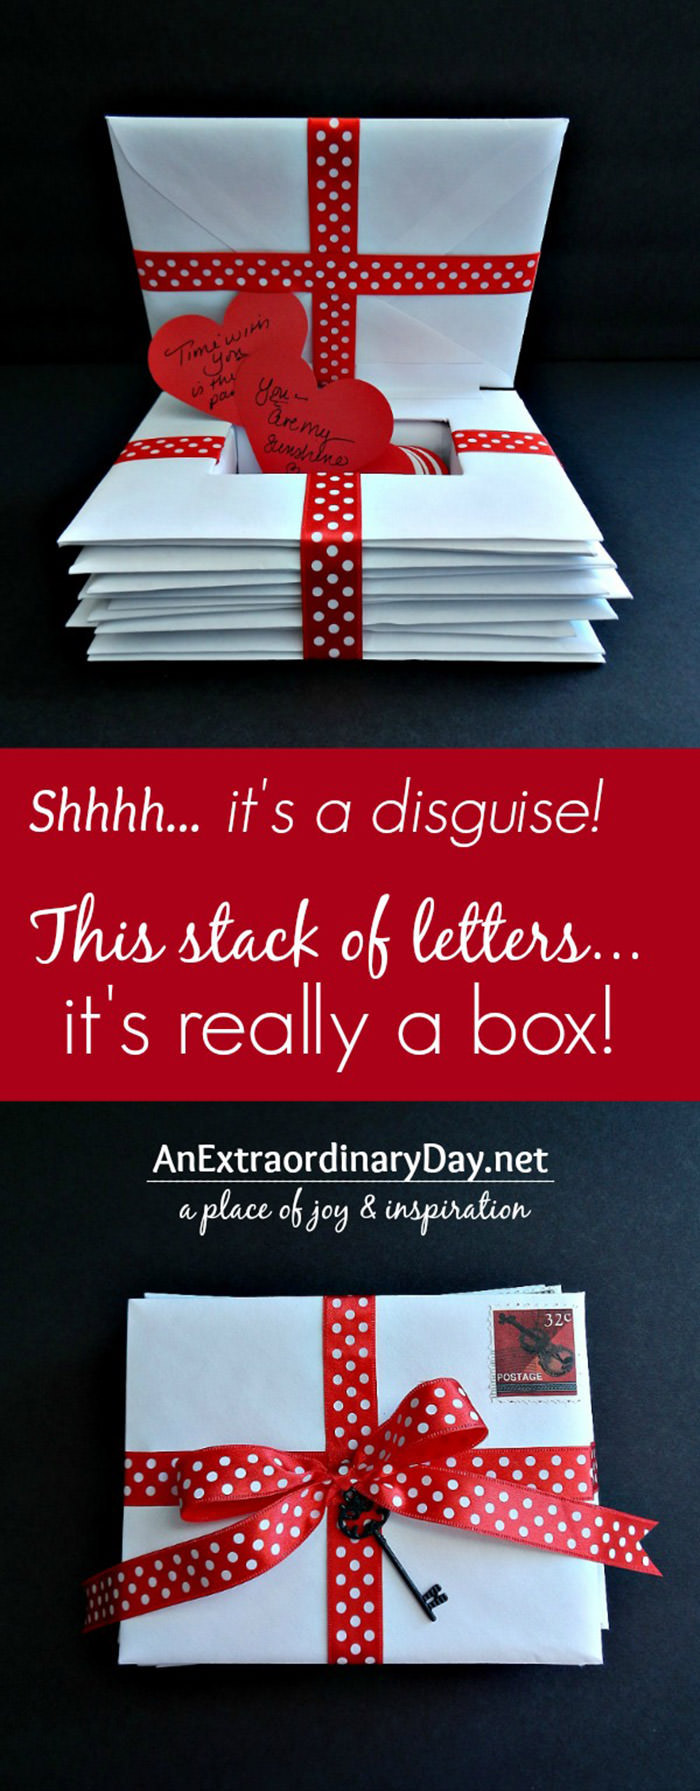 box disguised as letters